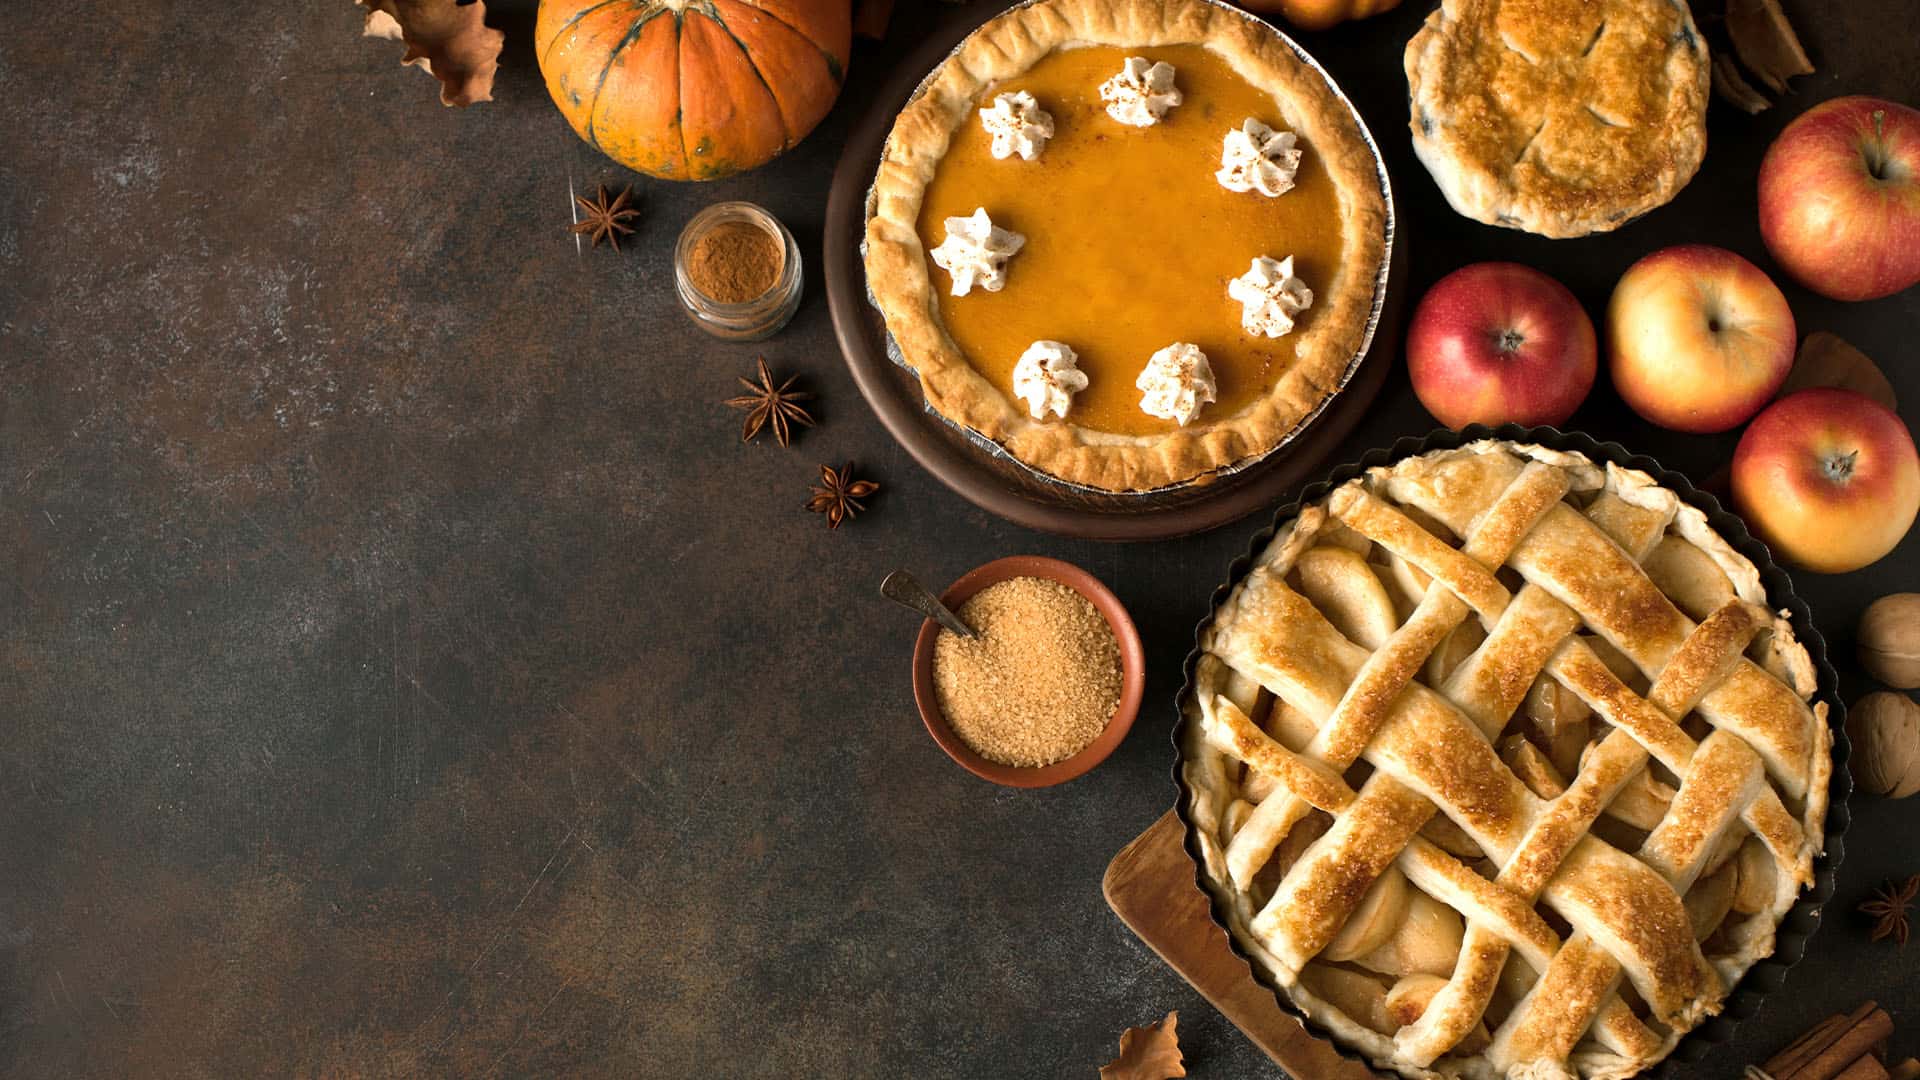 Topic of the Week: Favorite Holiday Pie In The US